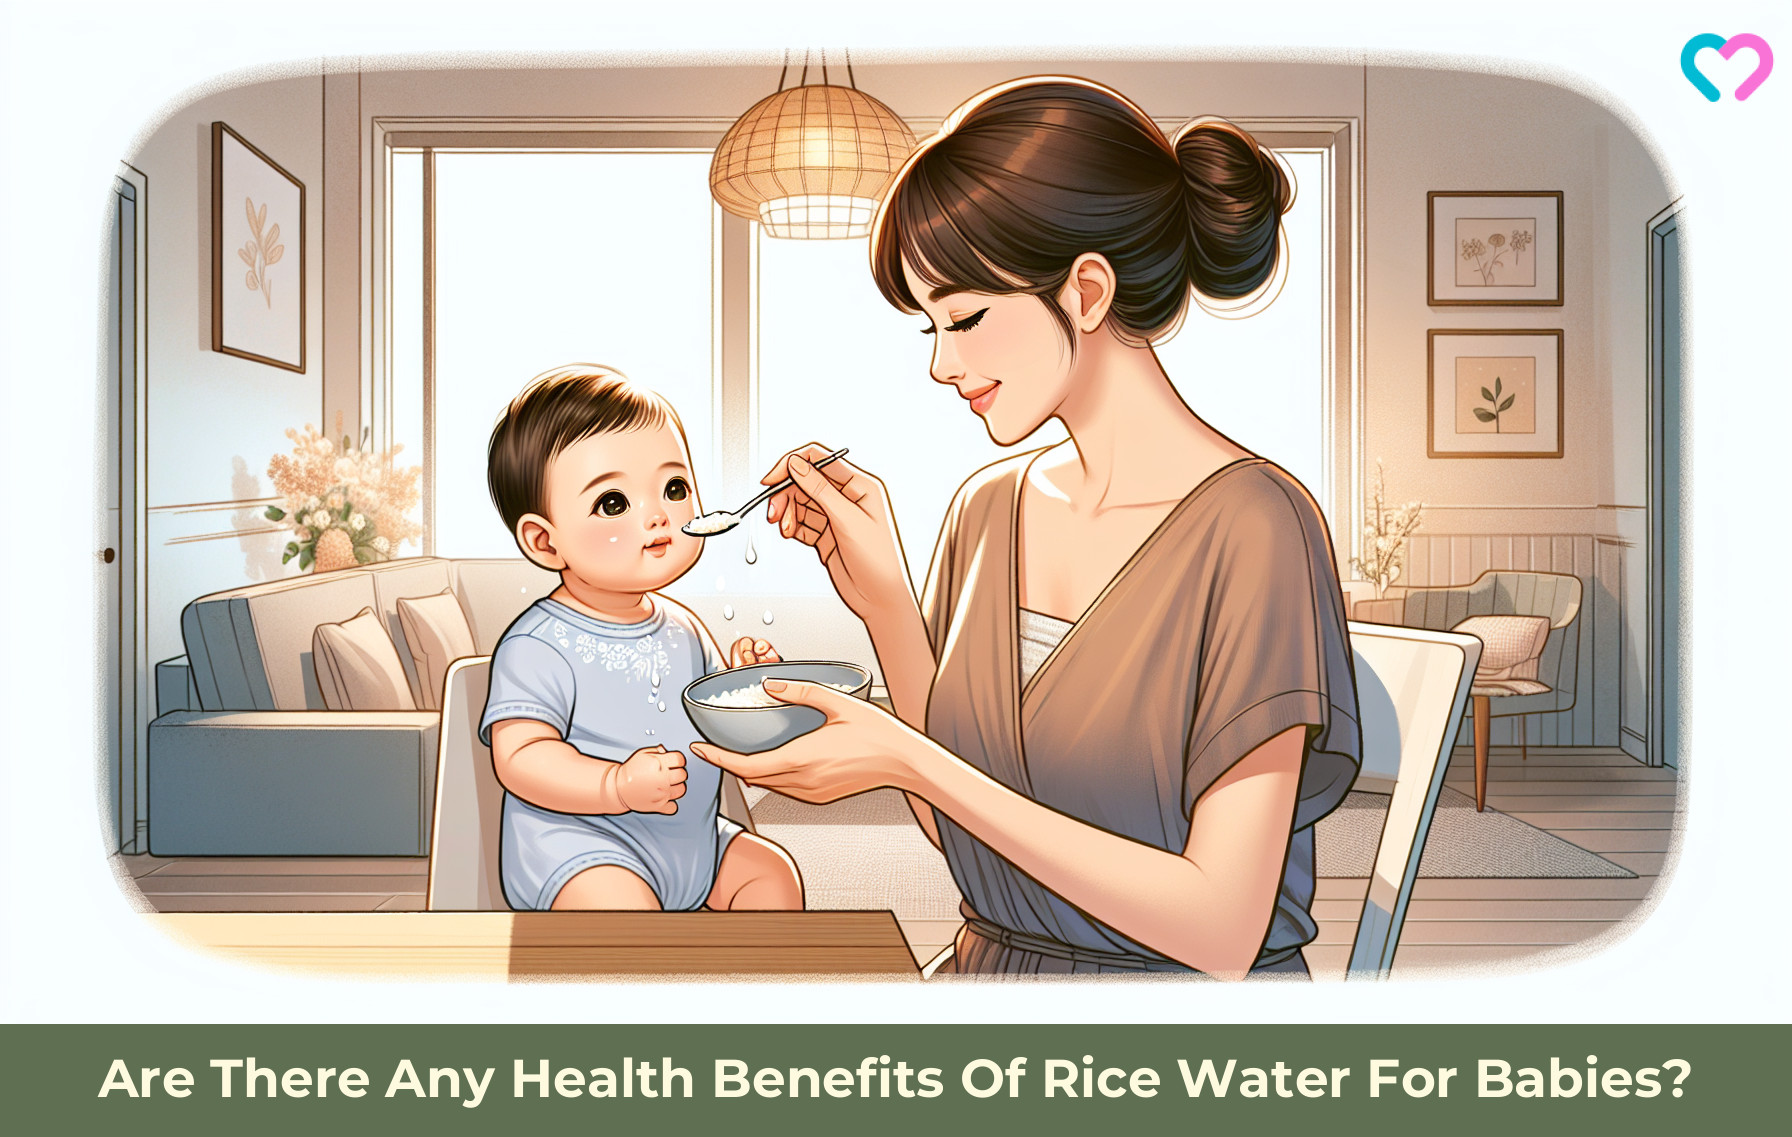 Rice Water For Babies_illustration